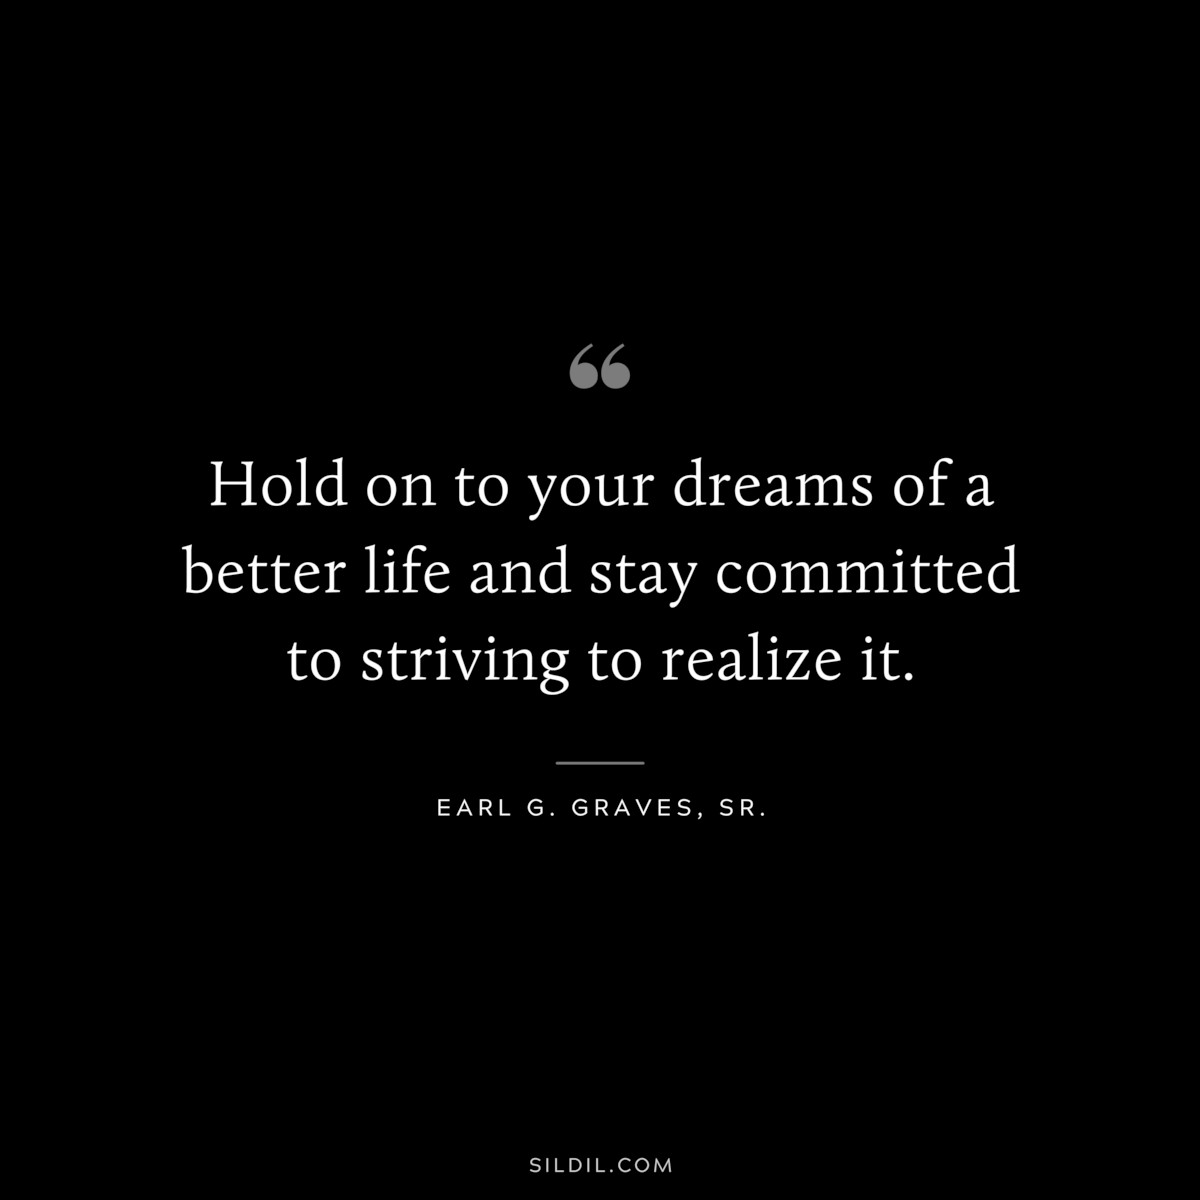 Hold on to your dreams of a better life and stay committed to striving to realize it. ― Earl G. Graves, Sr.